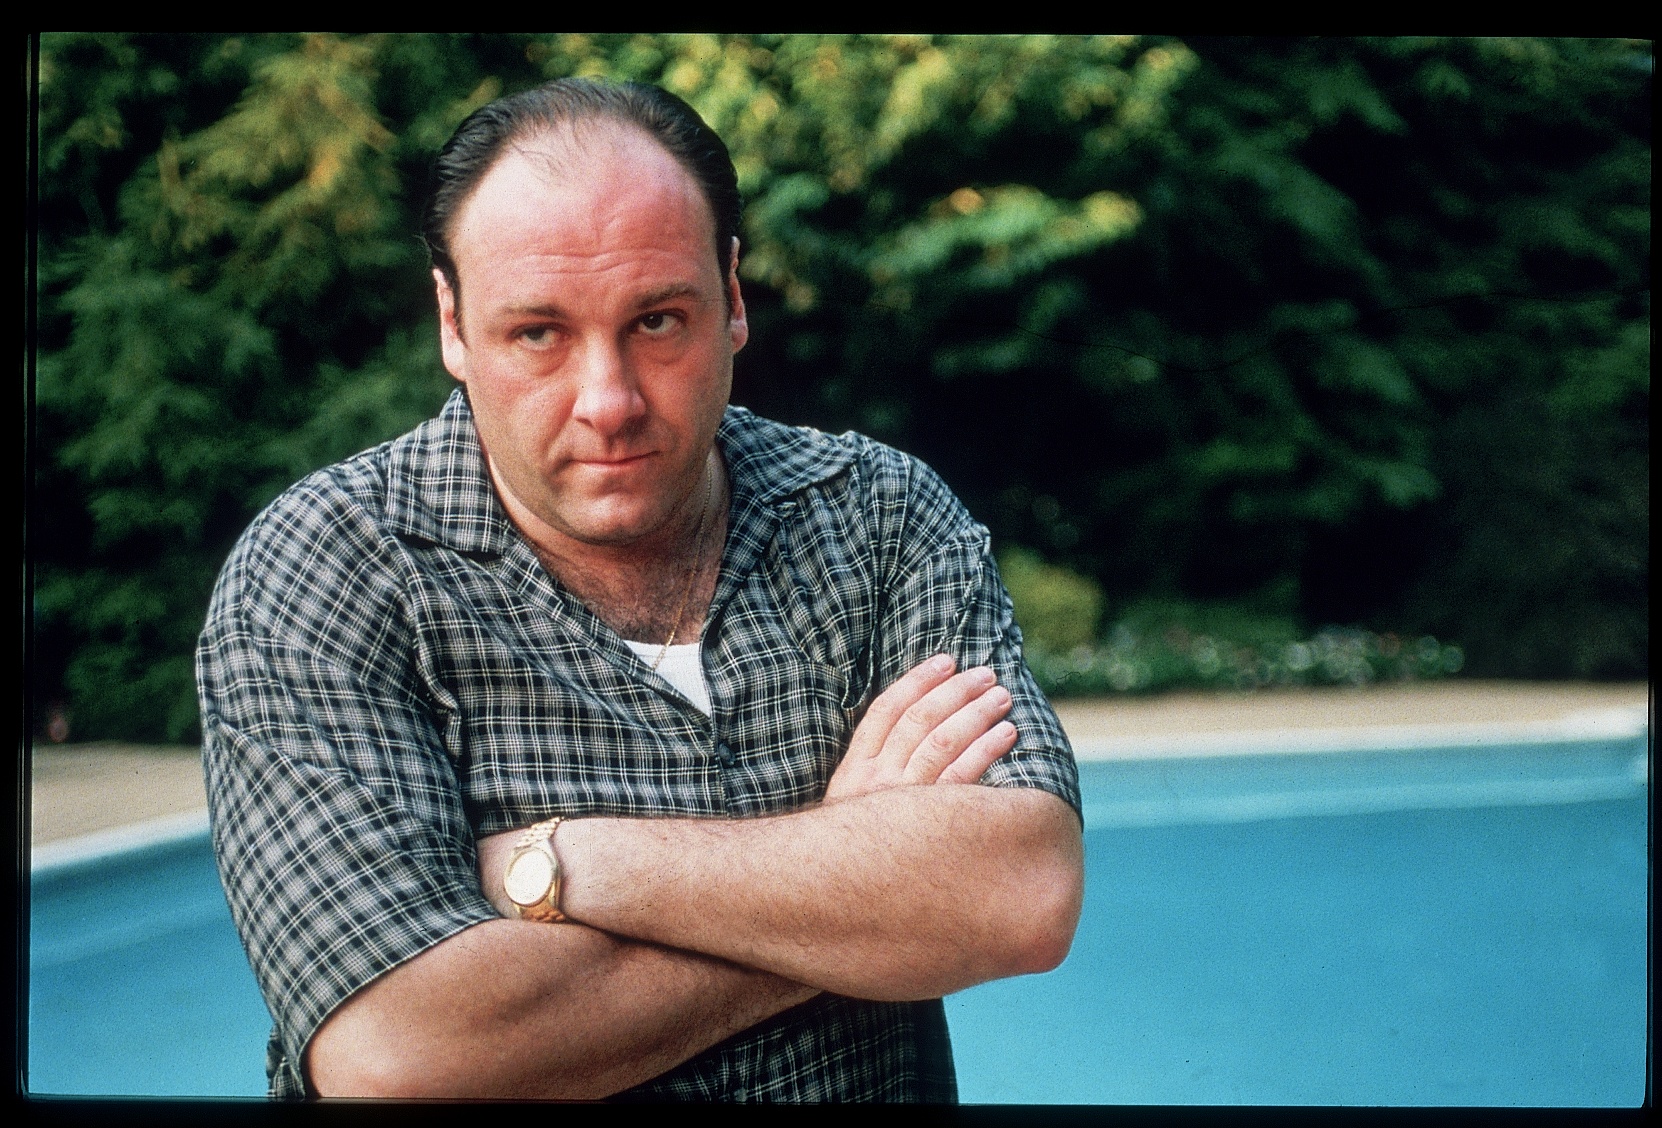 Actor James Gandolfini in scene from HBO TV drama series The Sopranos.  (Photo by Anthony Neste/The LIFE Images Collection/Getty Images)